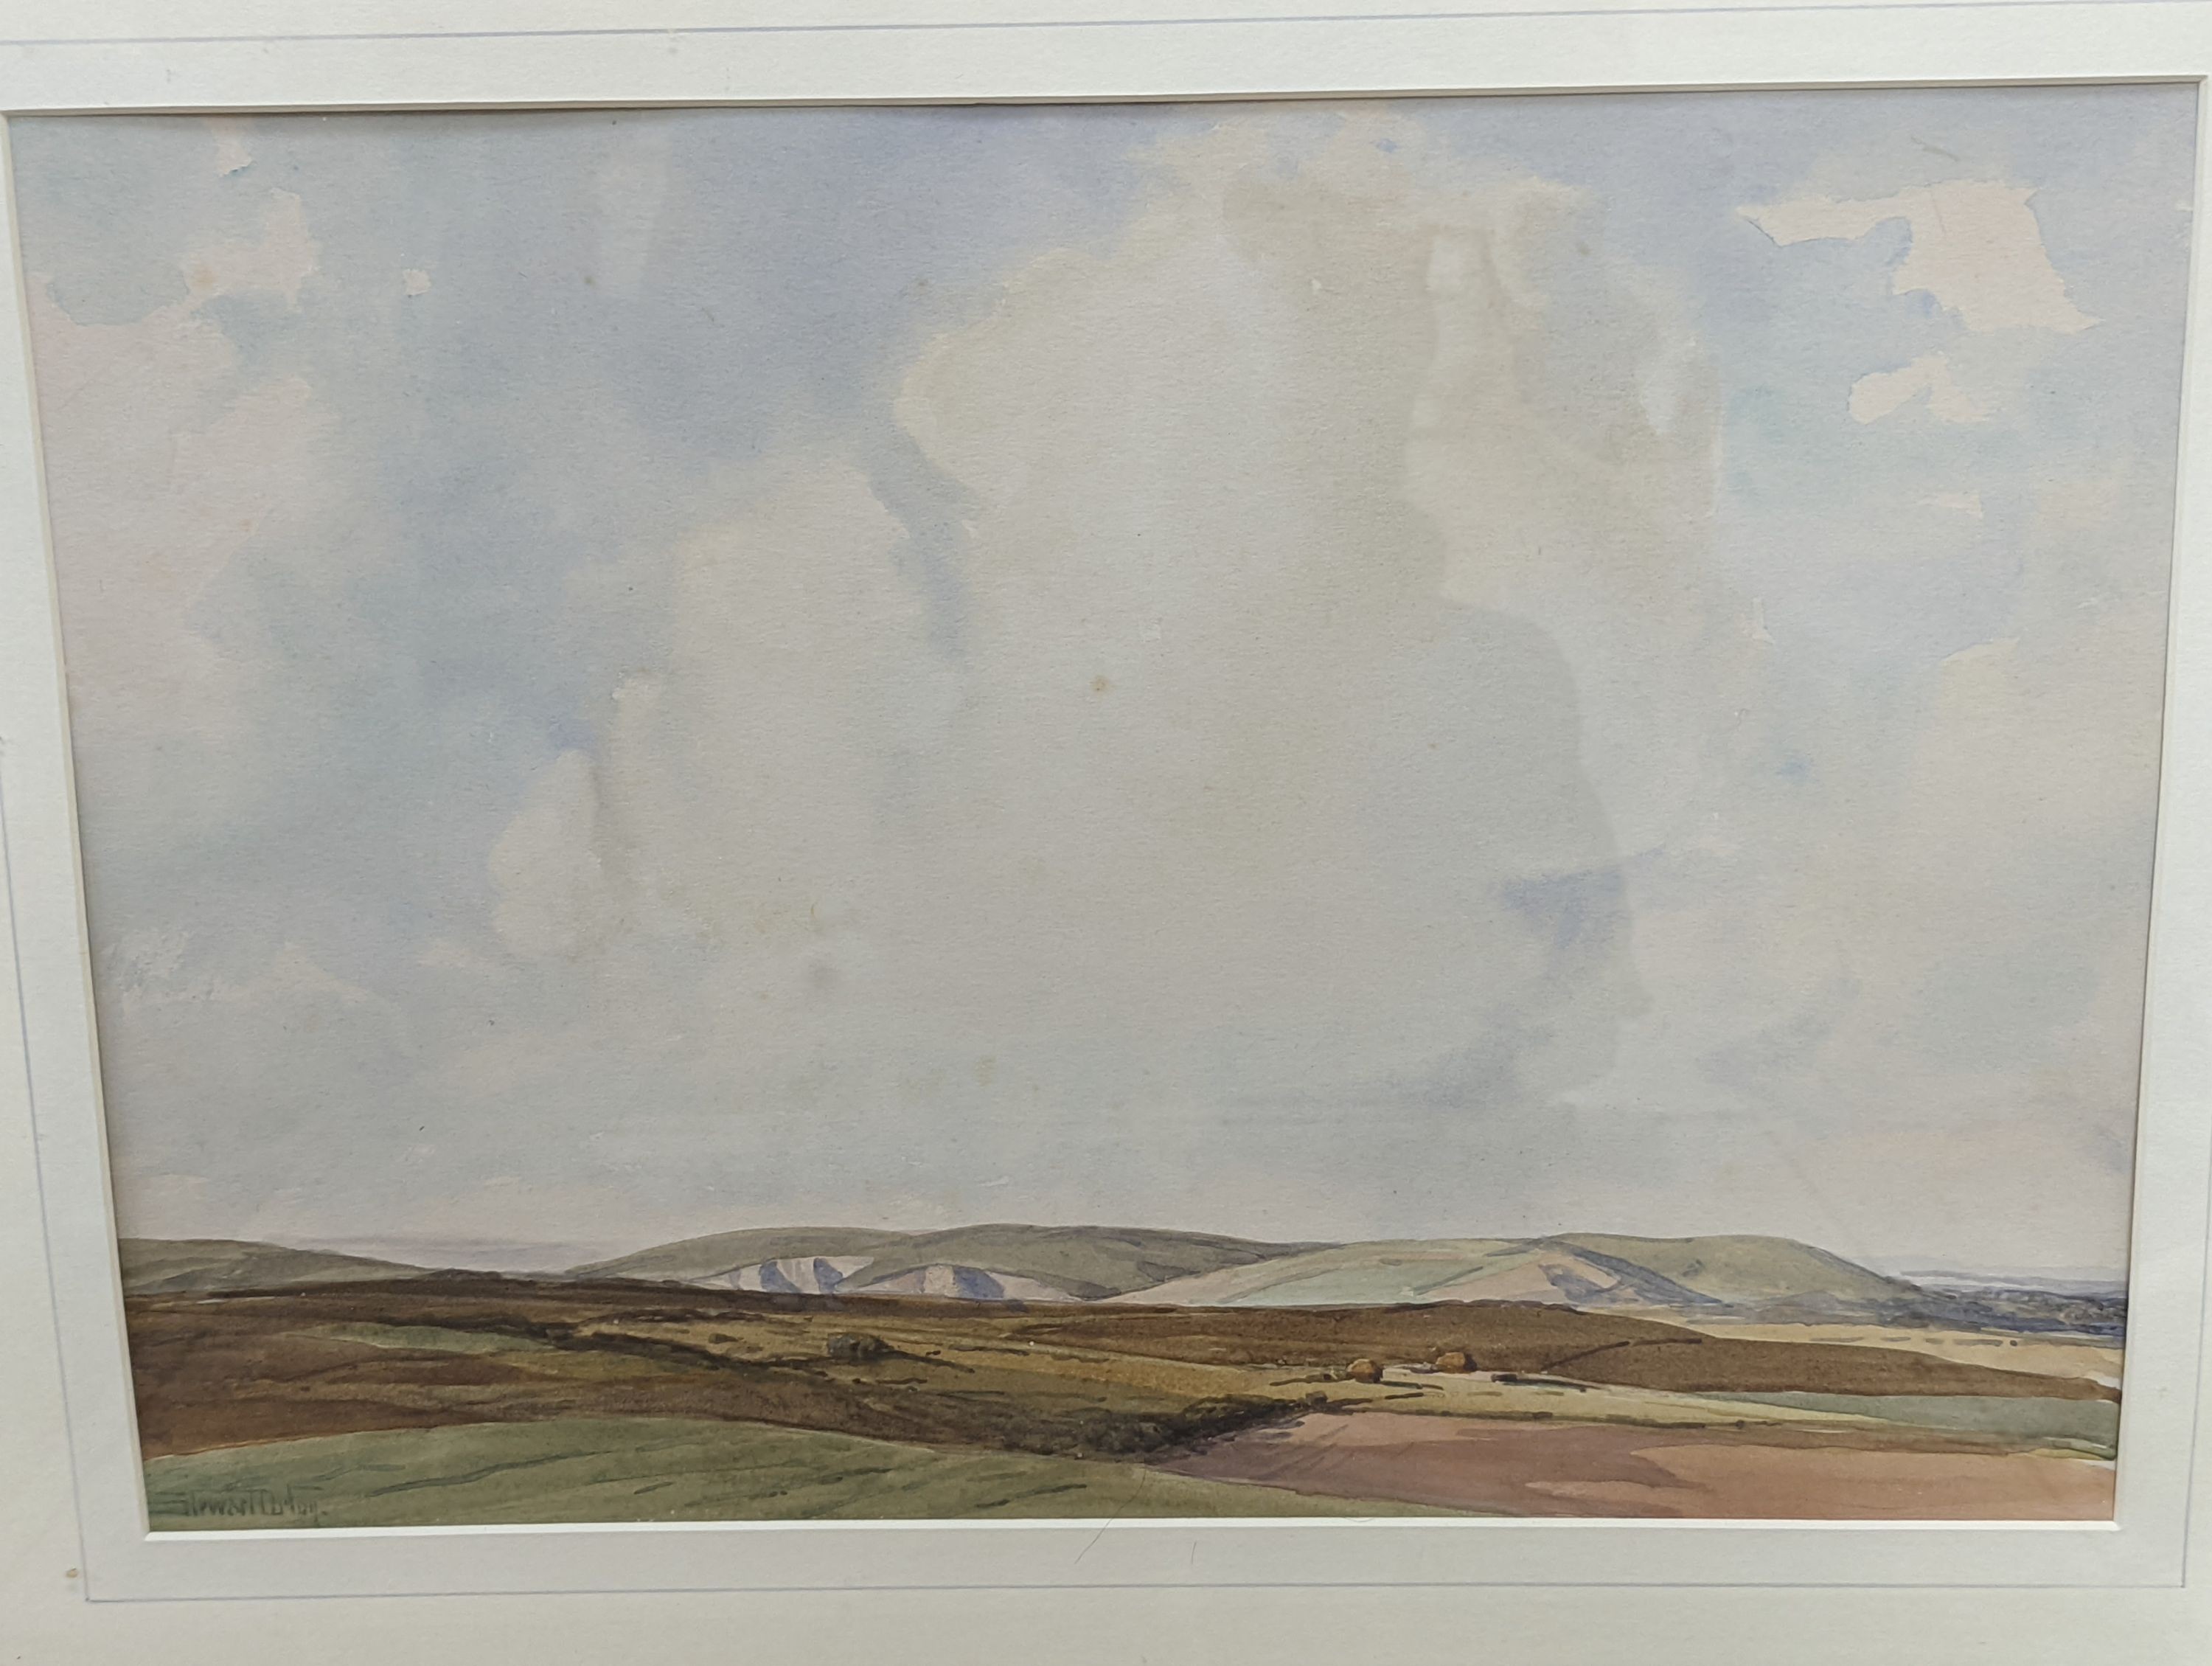 Walter Robert Stewart Acton (1879-1960), four Downland watercolours including Lewes Chalk Pit and - Image 4 of 5